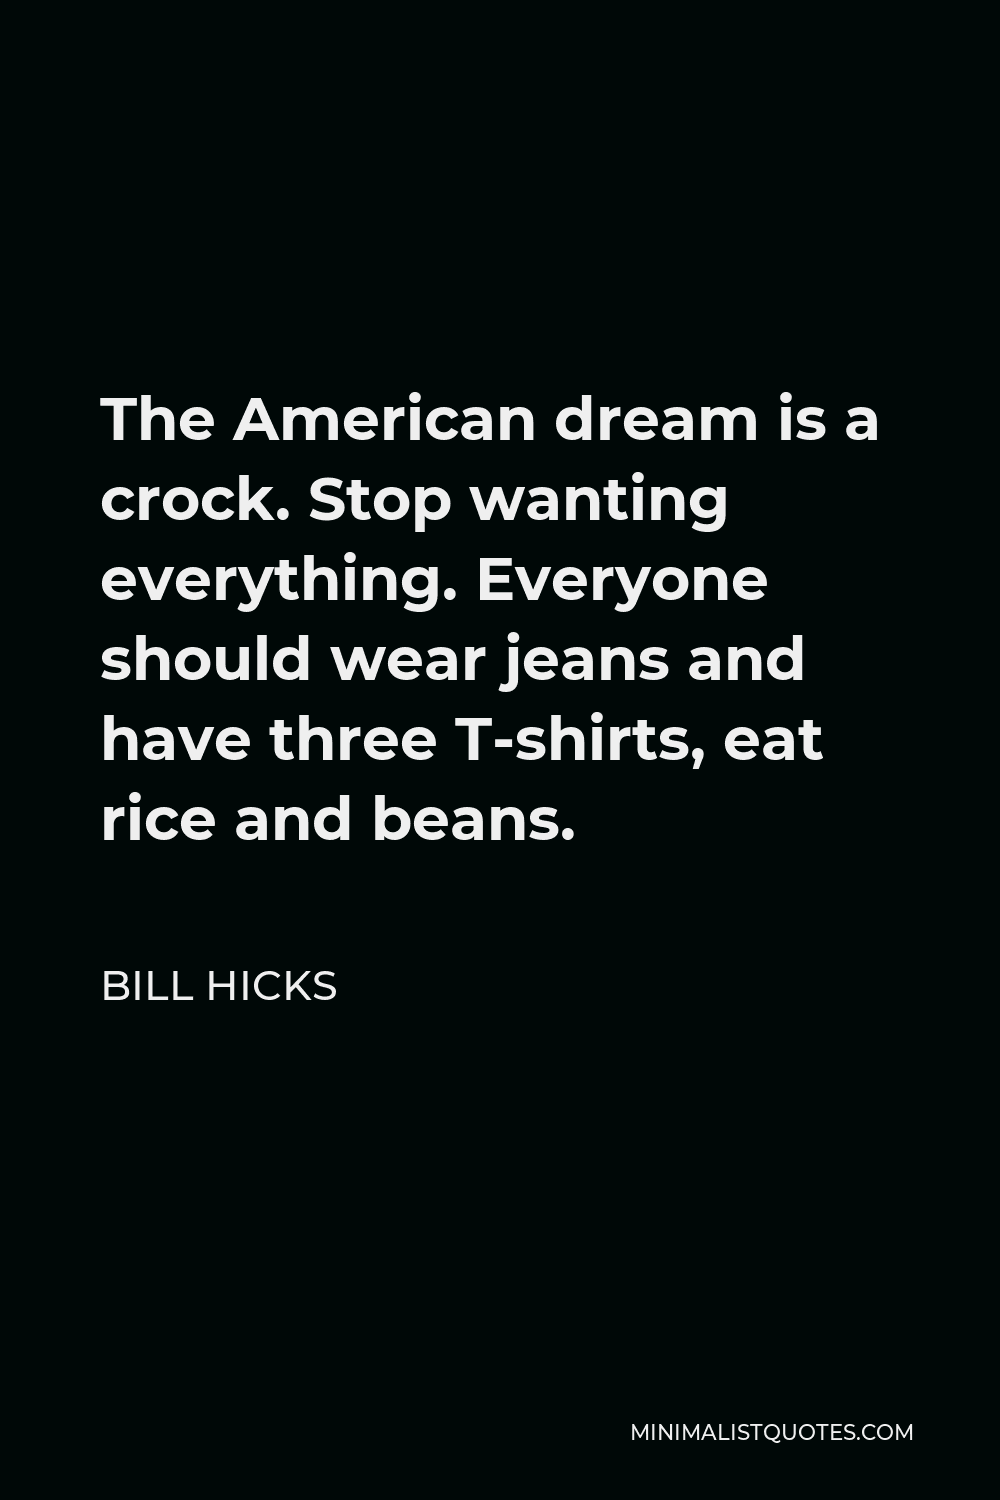 Bill Hicks Quote - The American dream is a crock. Stop wanting everything. Everyone should wear jeans and have three T-shirts, eat rice and beans.